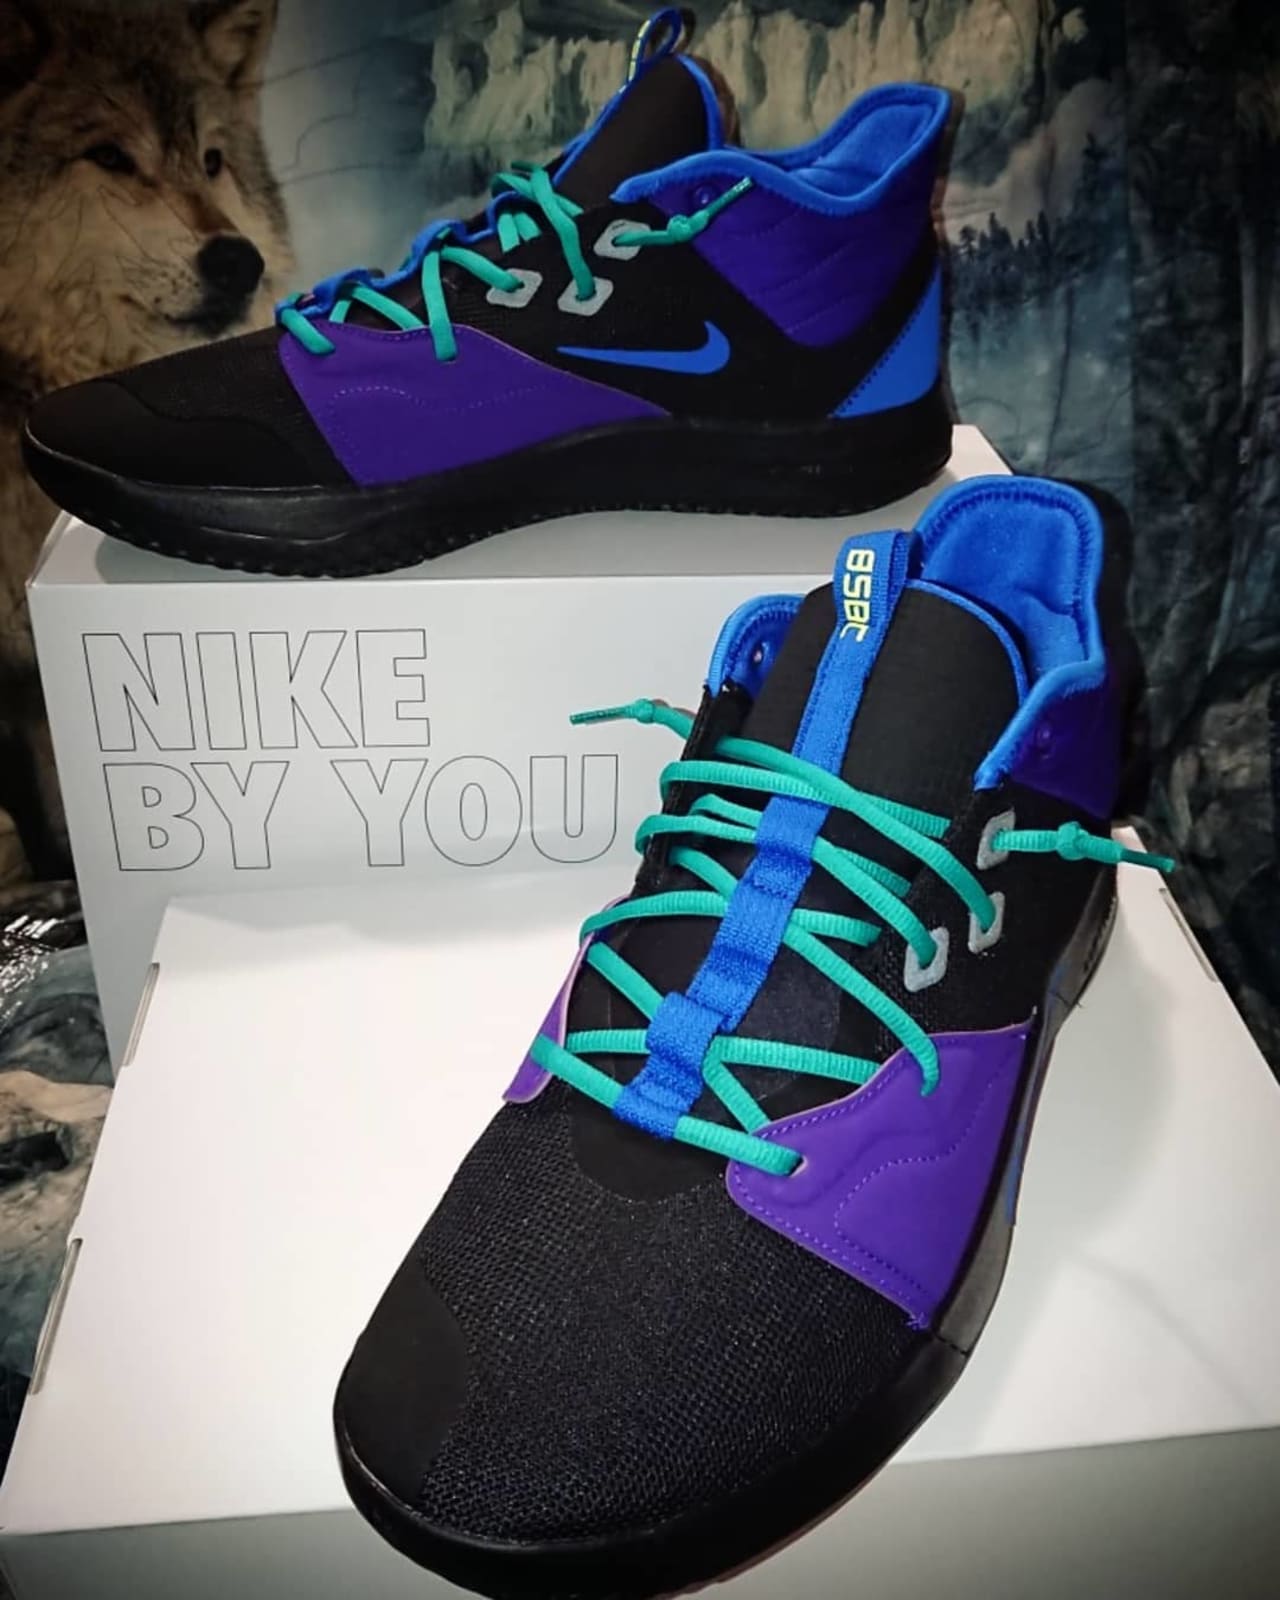 pg 3 by you nike